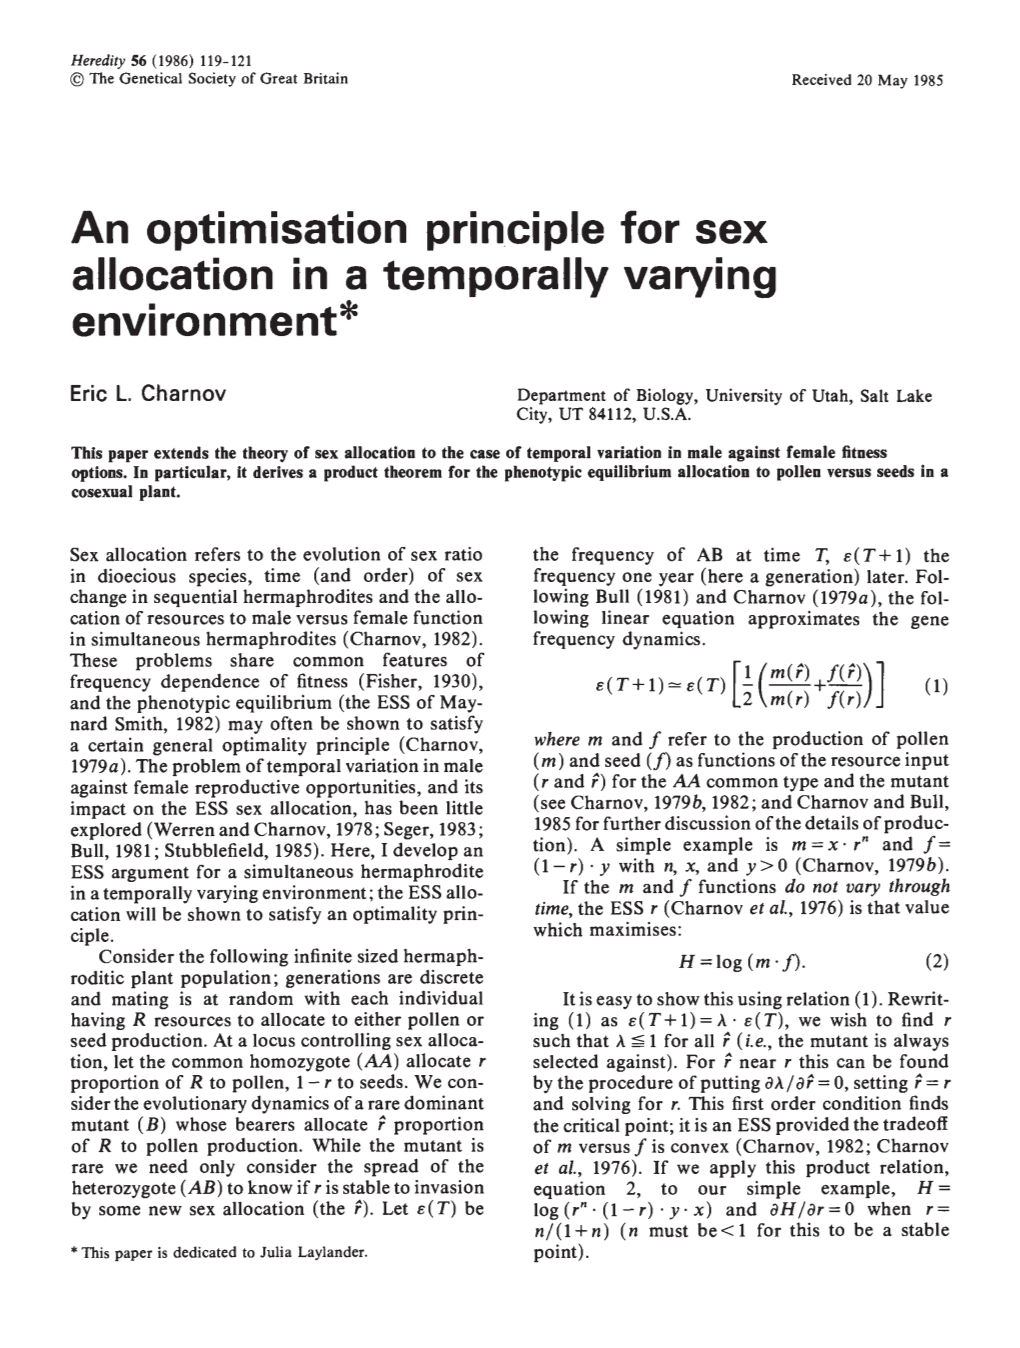 An Optimisation Principle for Sex Allocation in a Temporally Varying Environment*